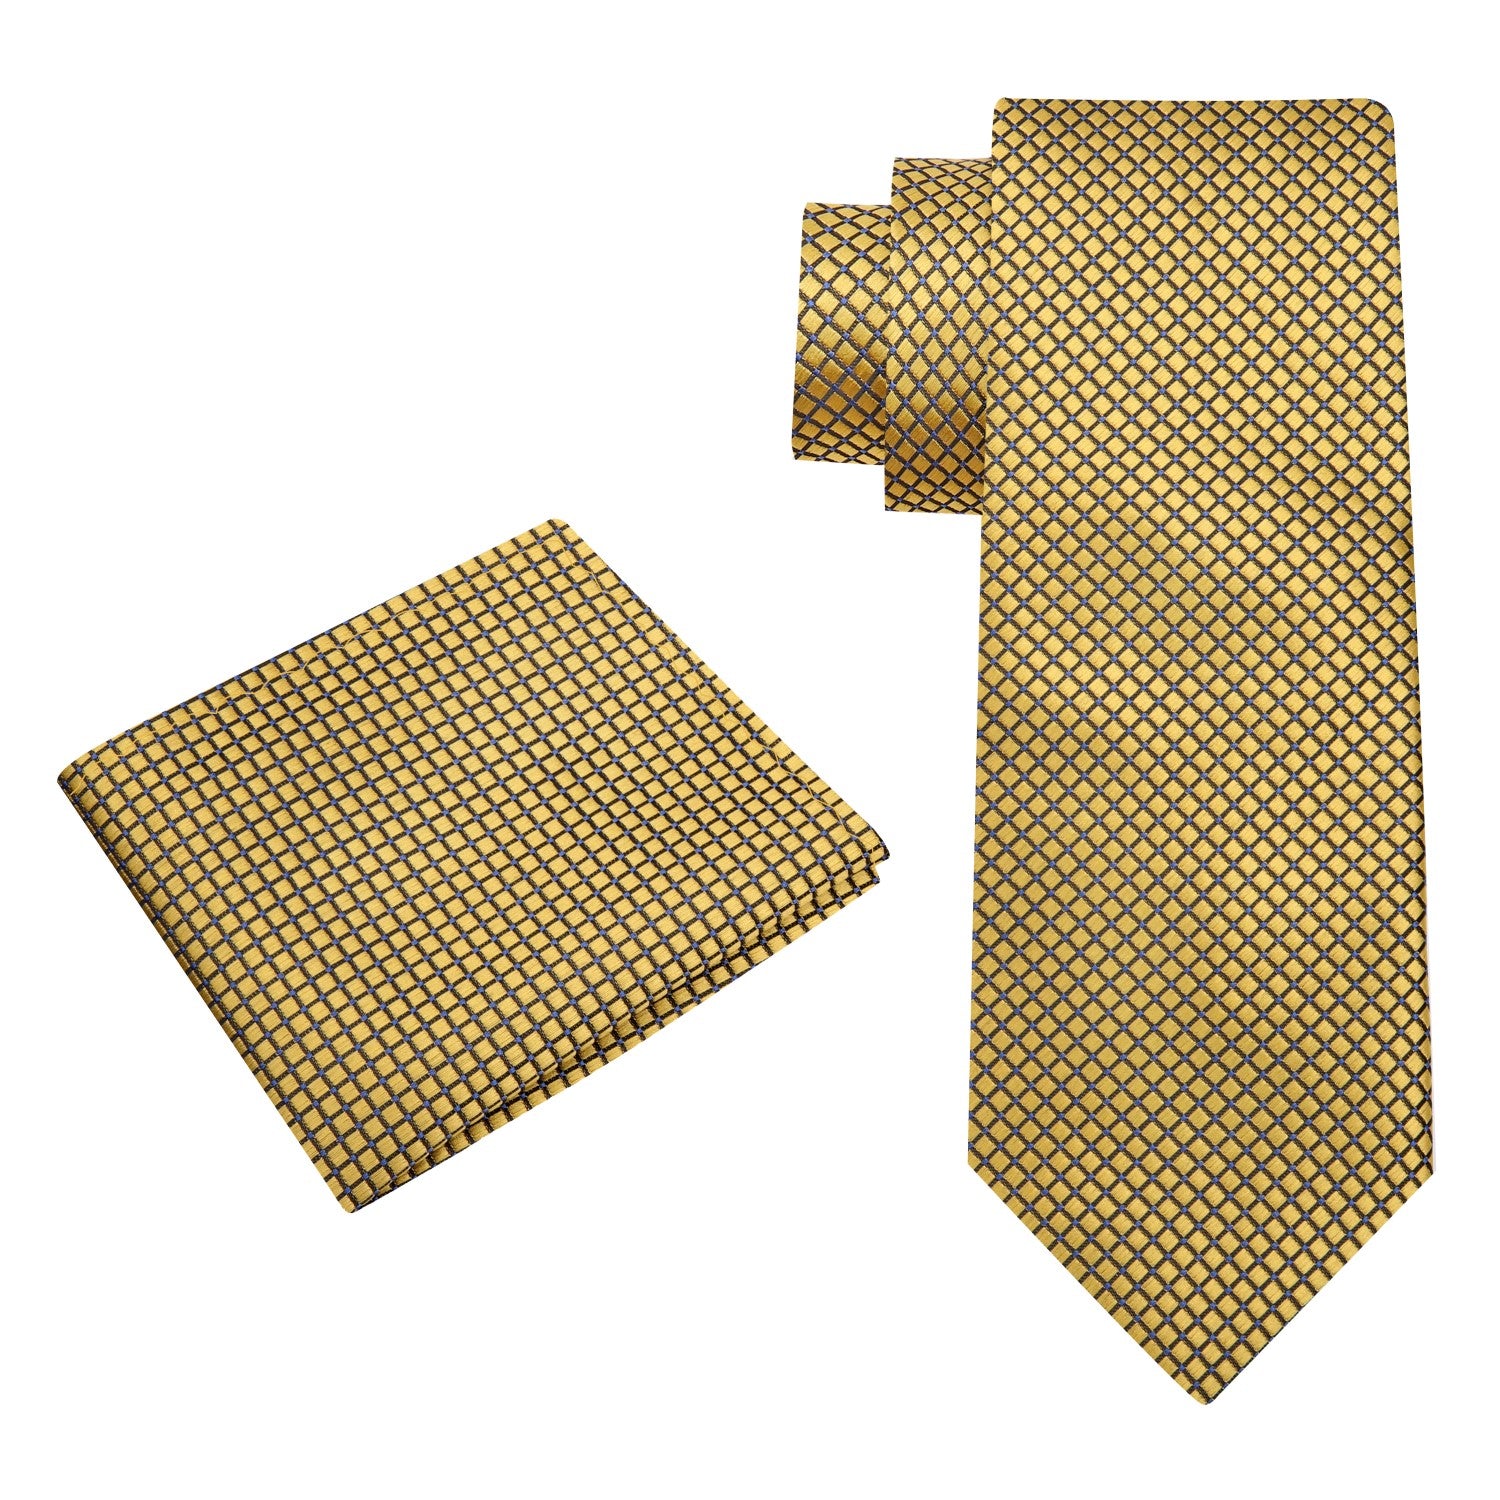 Alt View: Gold Geometric Tie and Square